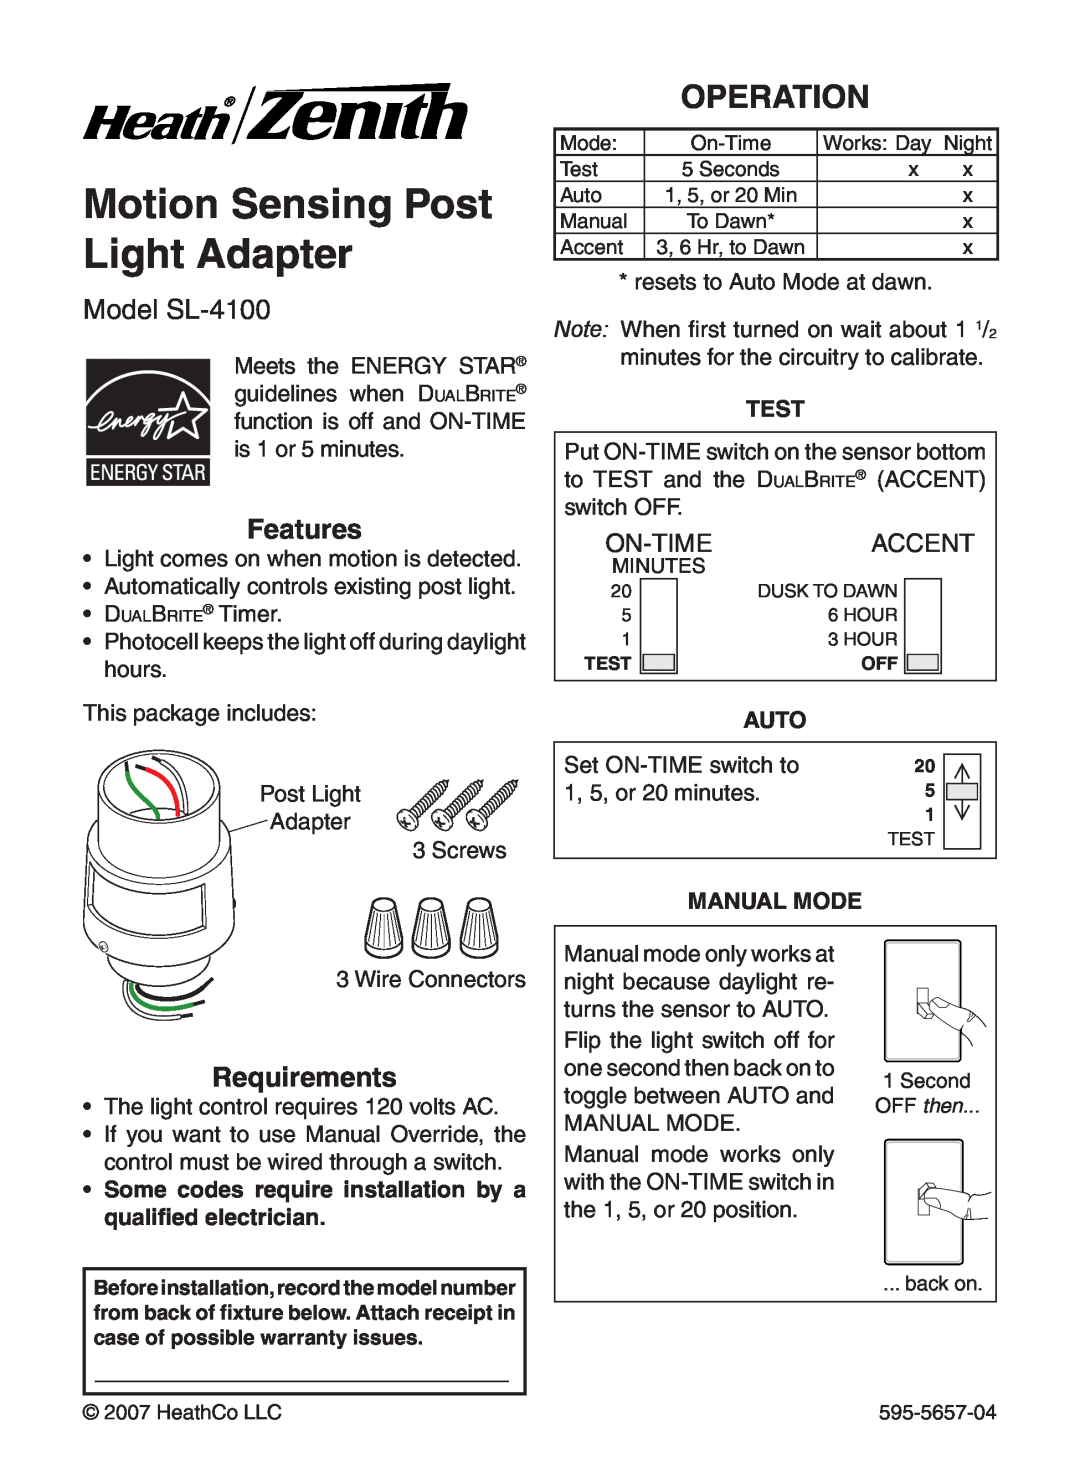 Heath Zenith warranty Motion Sensing Post Light Adapter, Operation, Model SL-4100, Features, Requirements, On-Time 